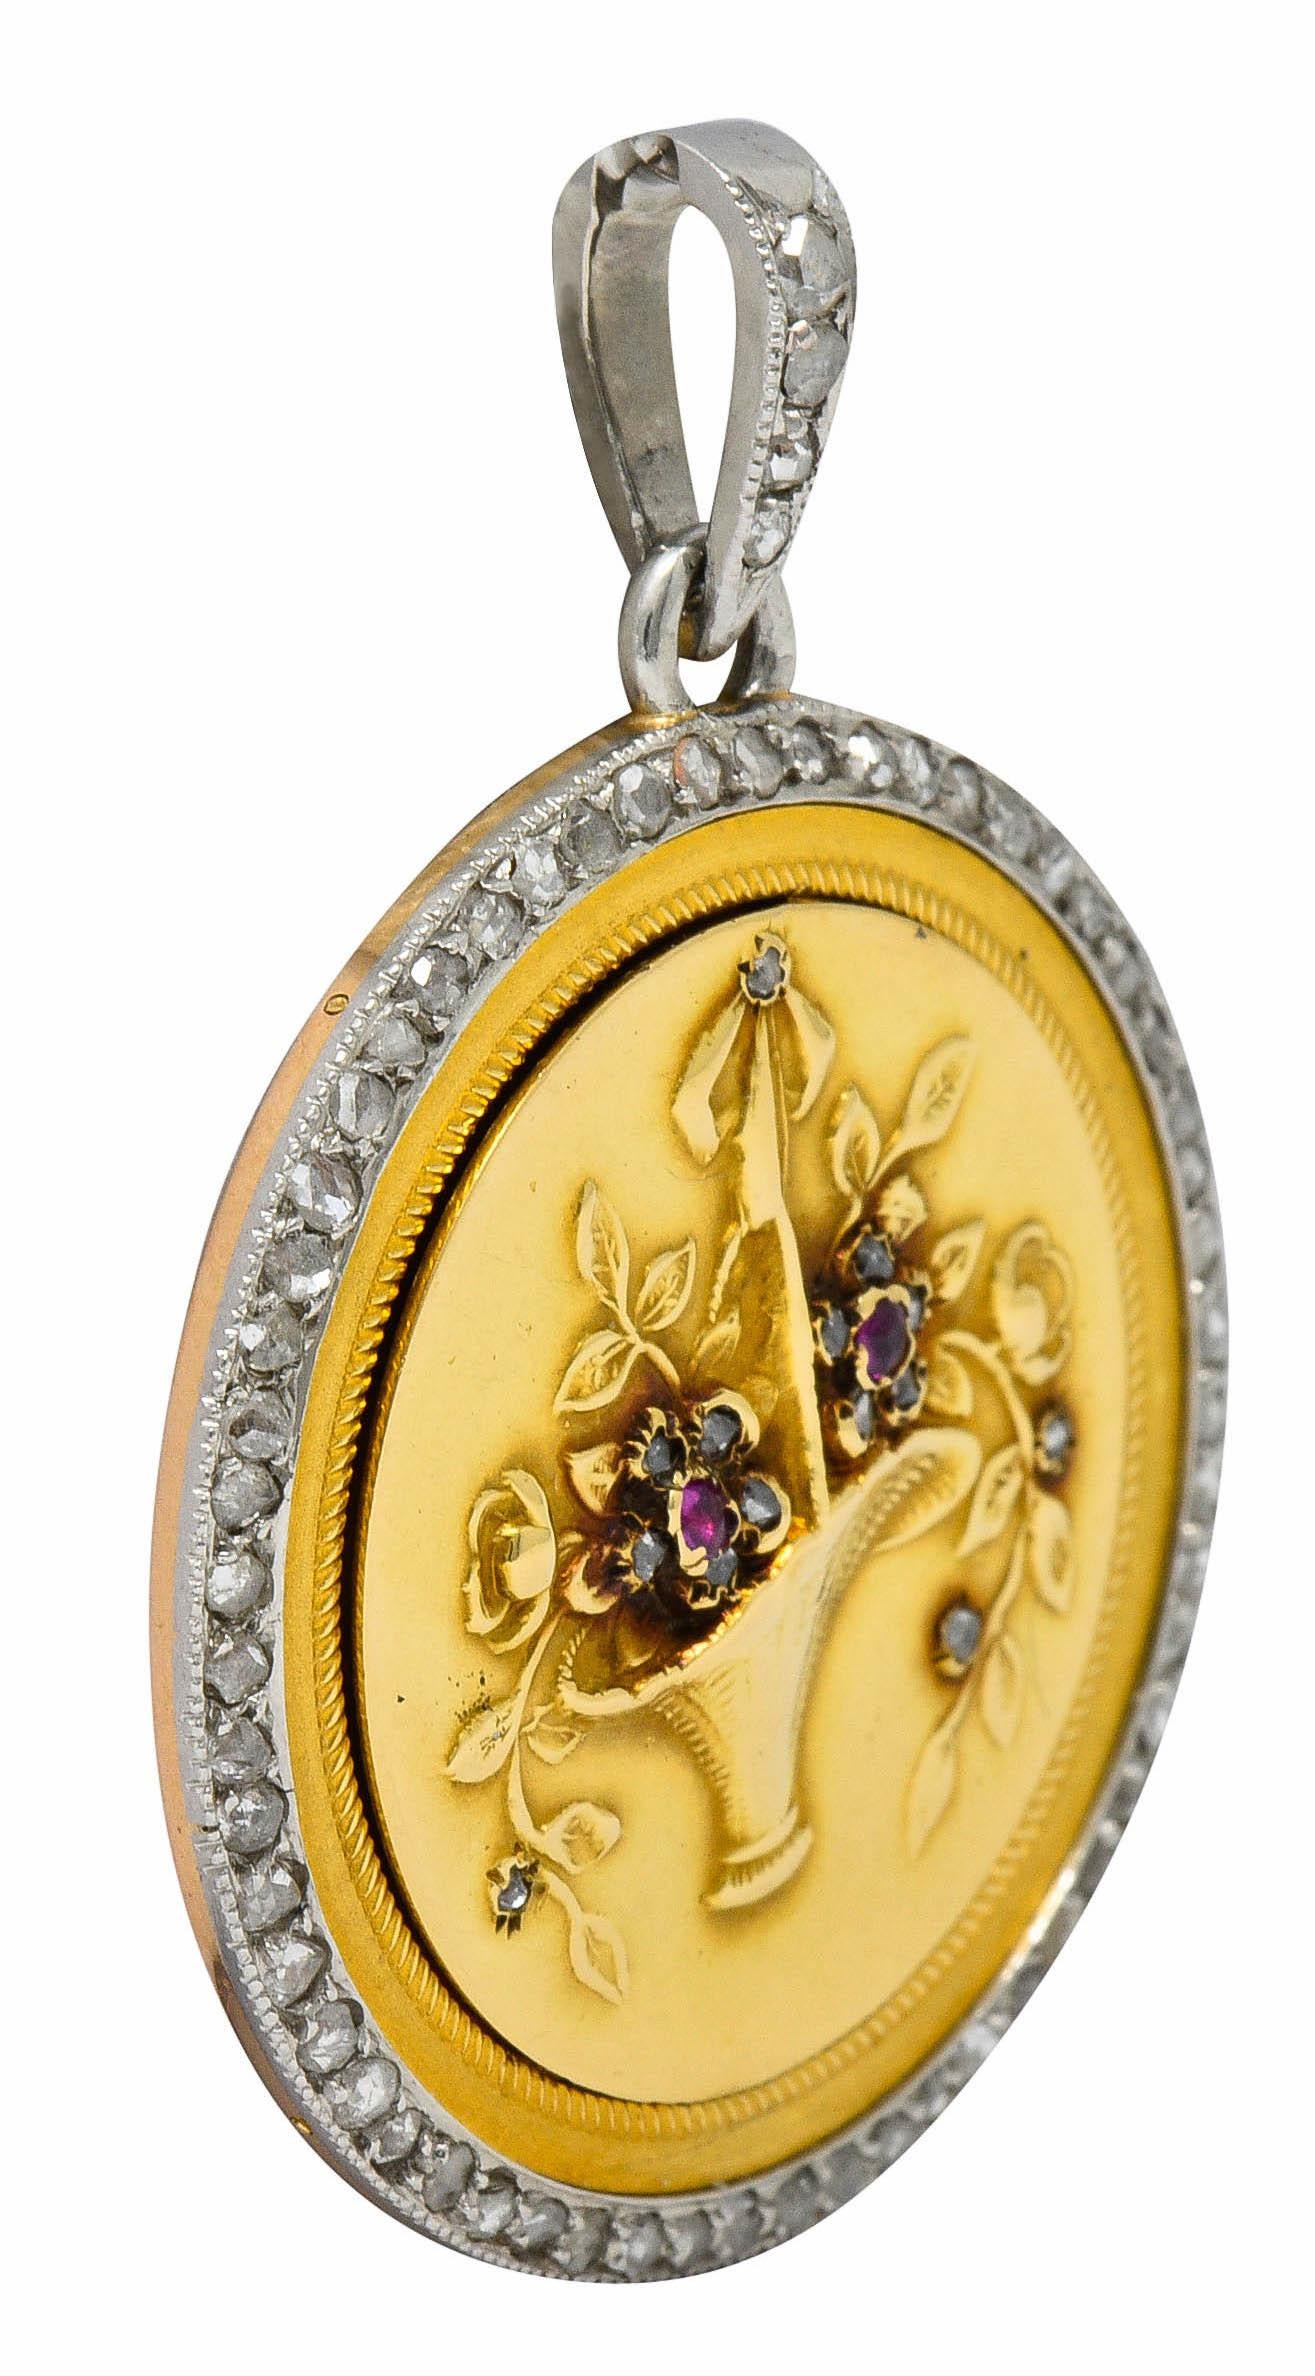 Large circular locket depicts a flourishing basket of florals with ruby and rose cut diamond accents

With a deeply ribbed surround and a platinum halo accented by rose cut diamonds

Weighing in total approximately 0.82 carat with quality consistent